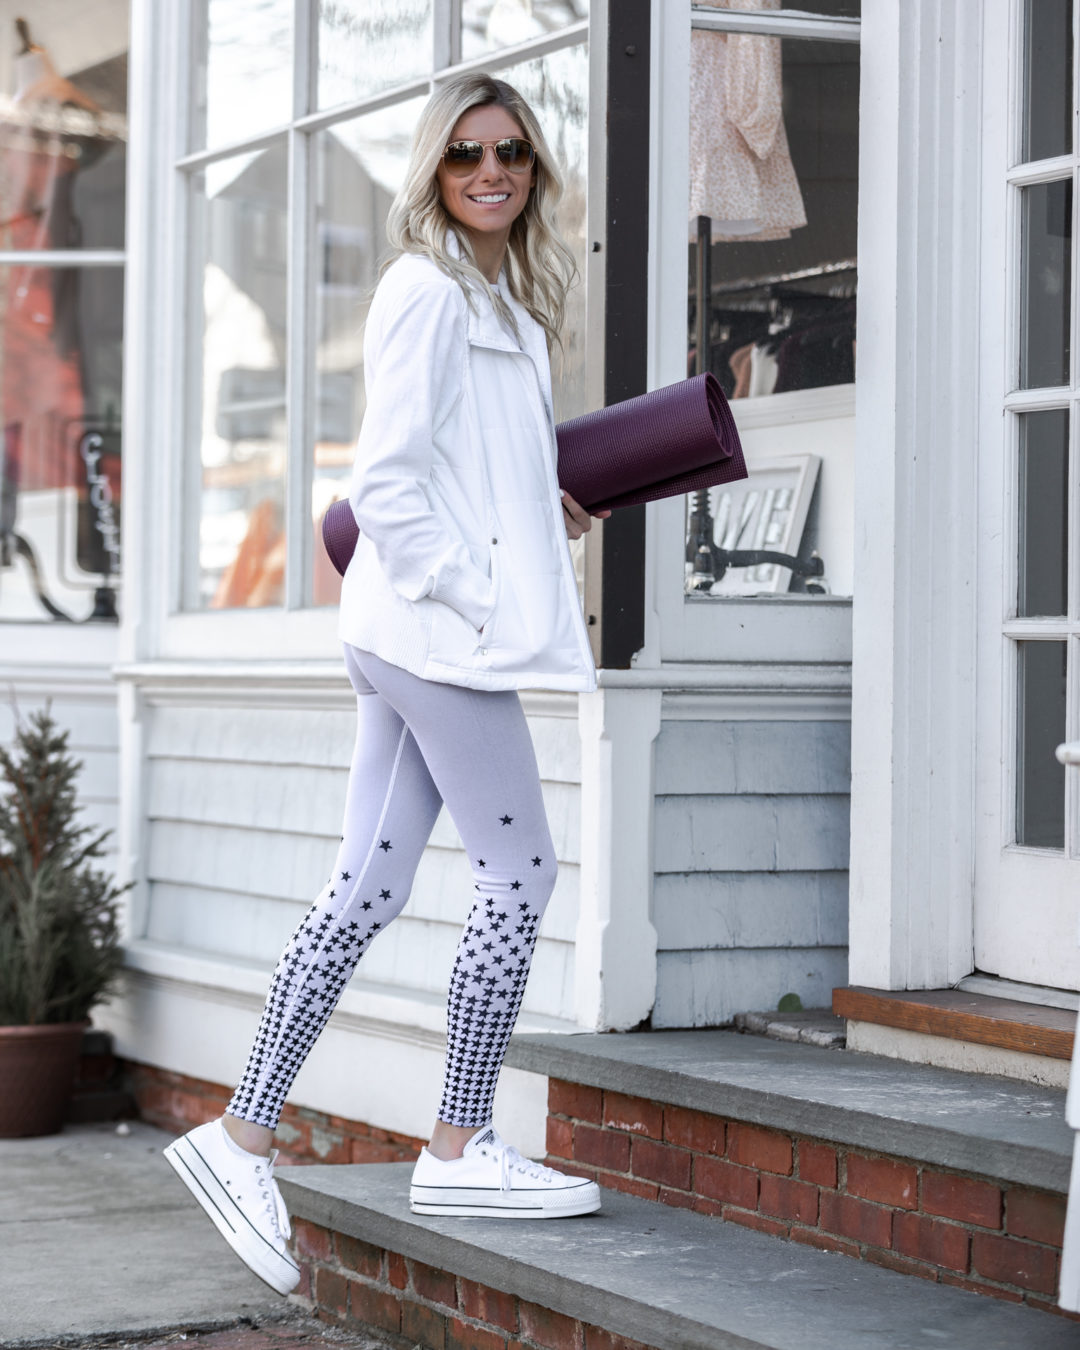 fabletics-althetic-wear-the-glamorous-gal